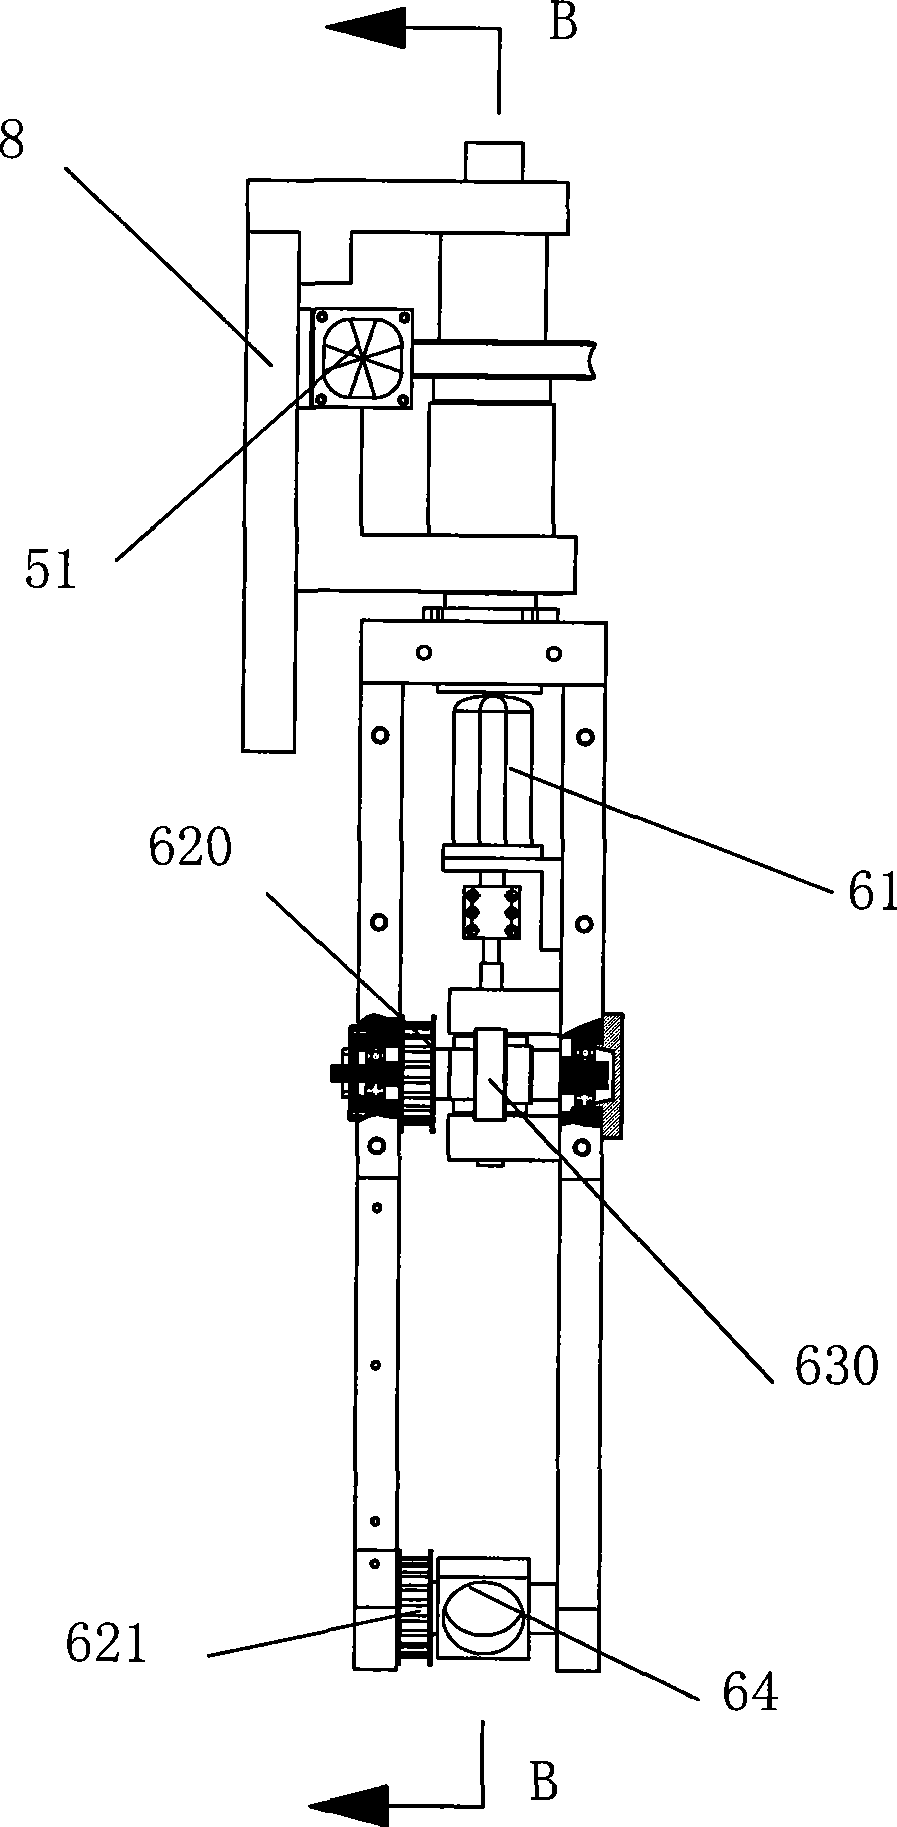 5-shaft linkage numerical control bonding machine and welding process control method thereof